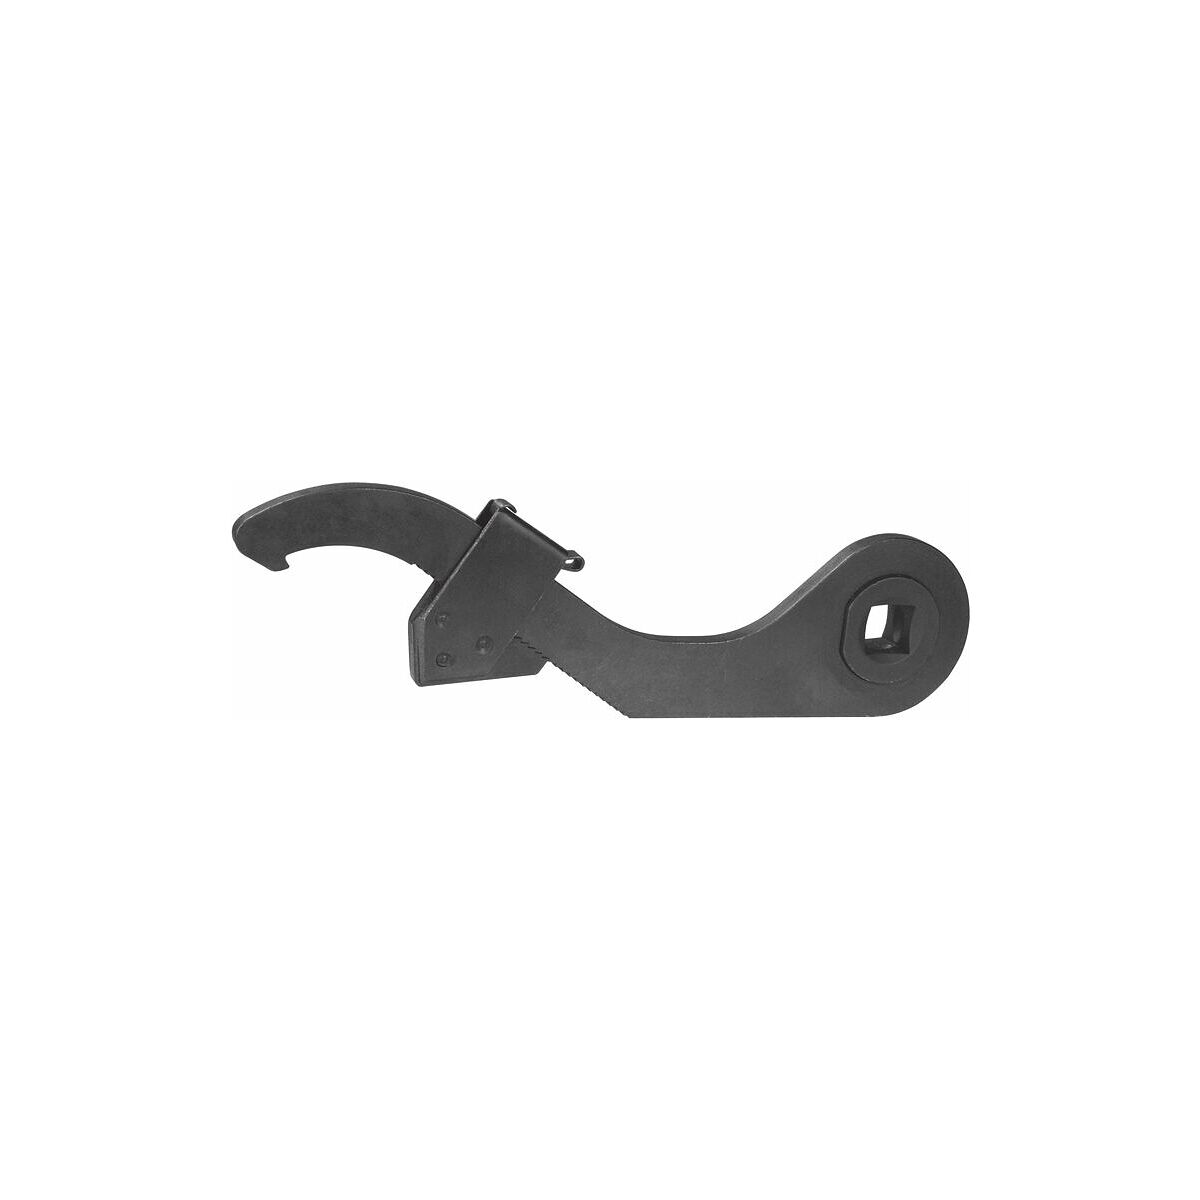 Simply buy Adjustable C-hook spanner, for torque wrench with square pin